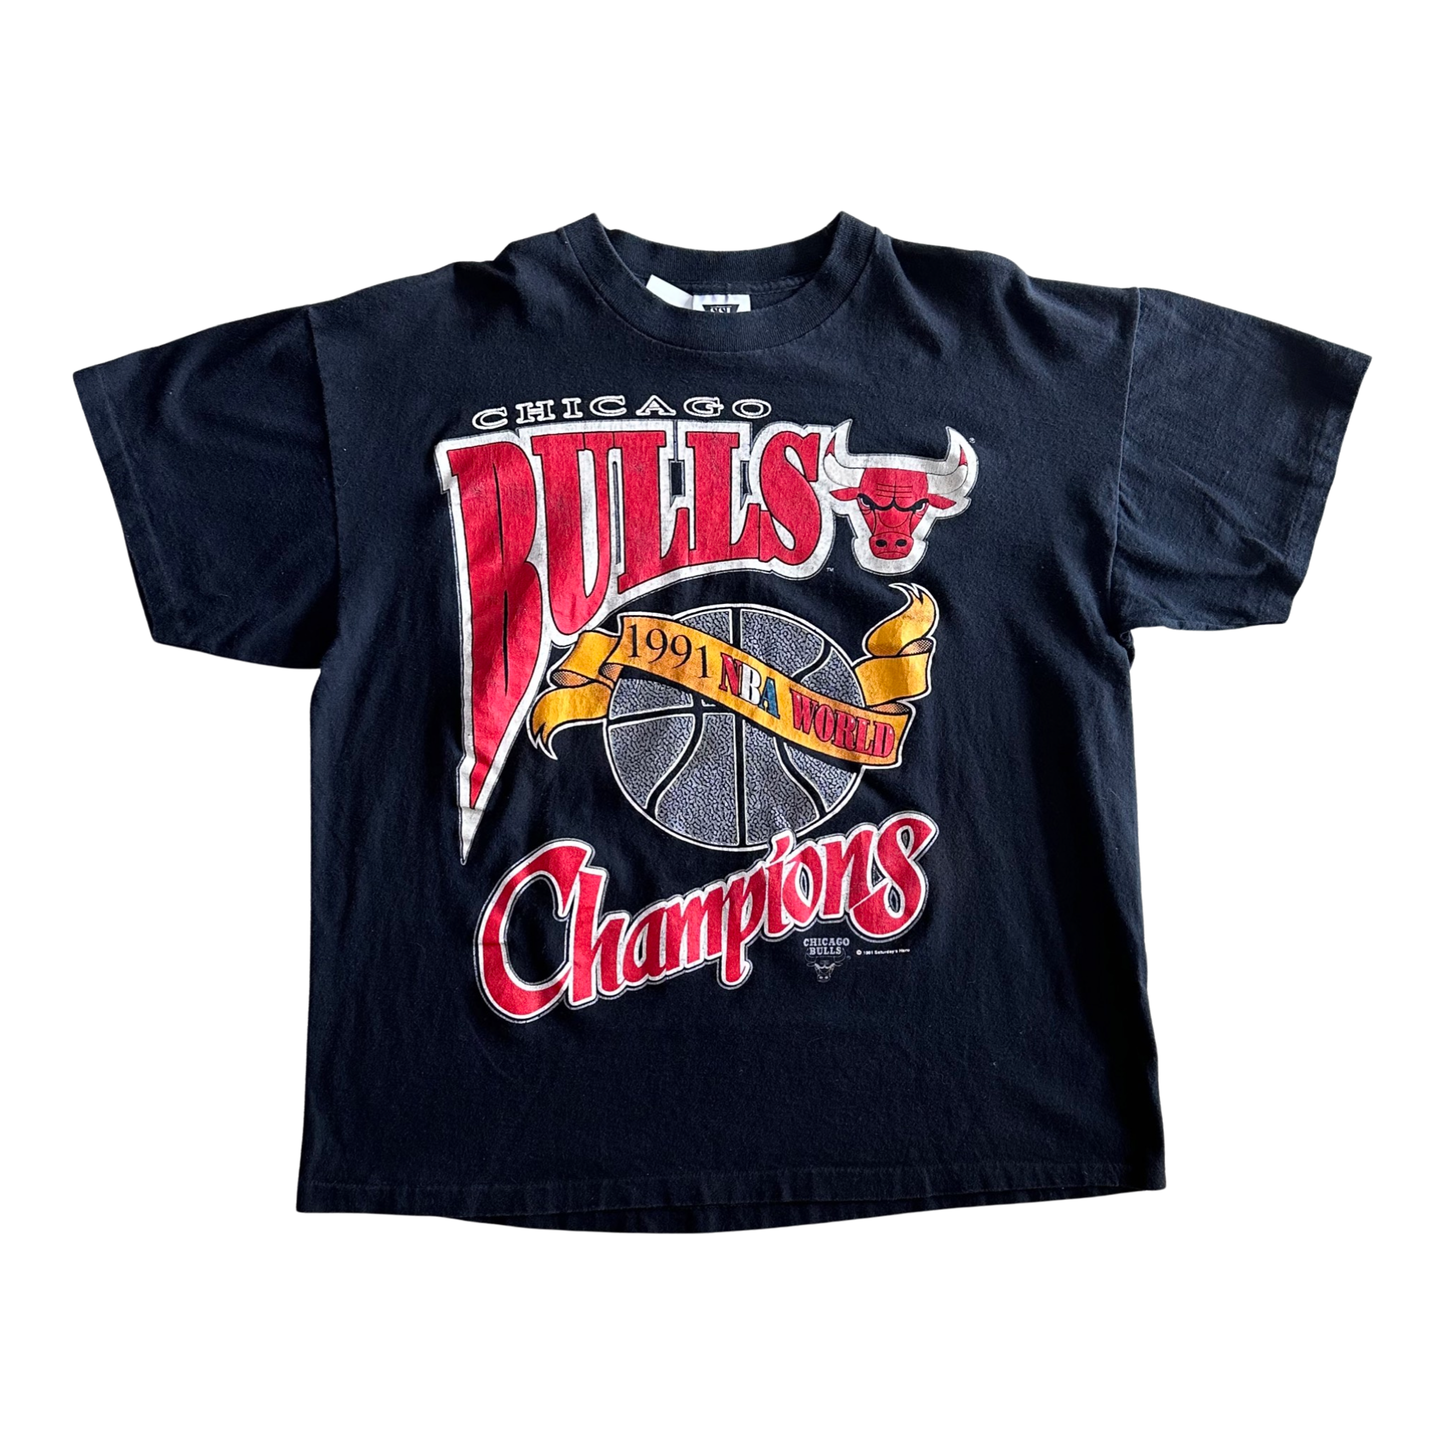 Vintage 1991 Chicago Bulls Champs Tee XL